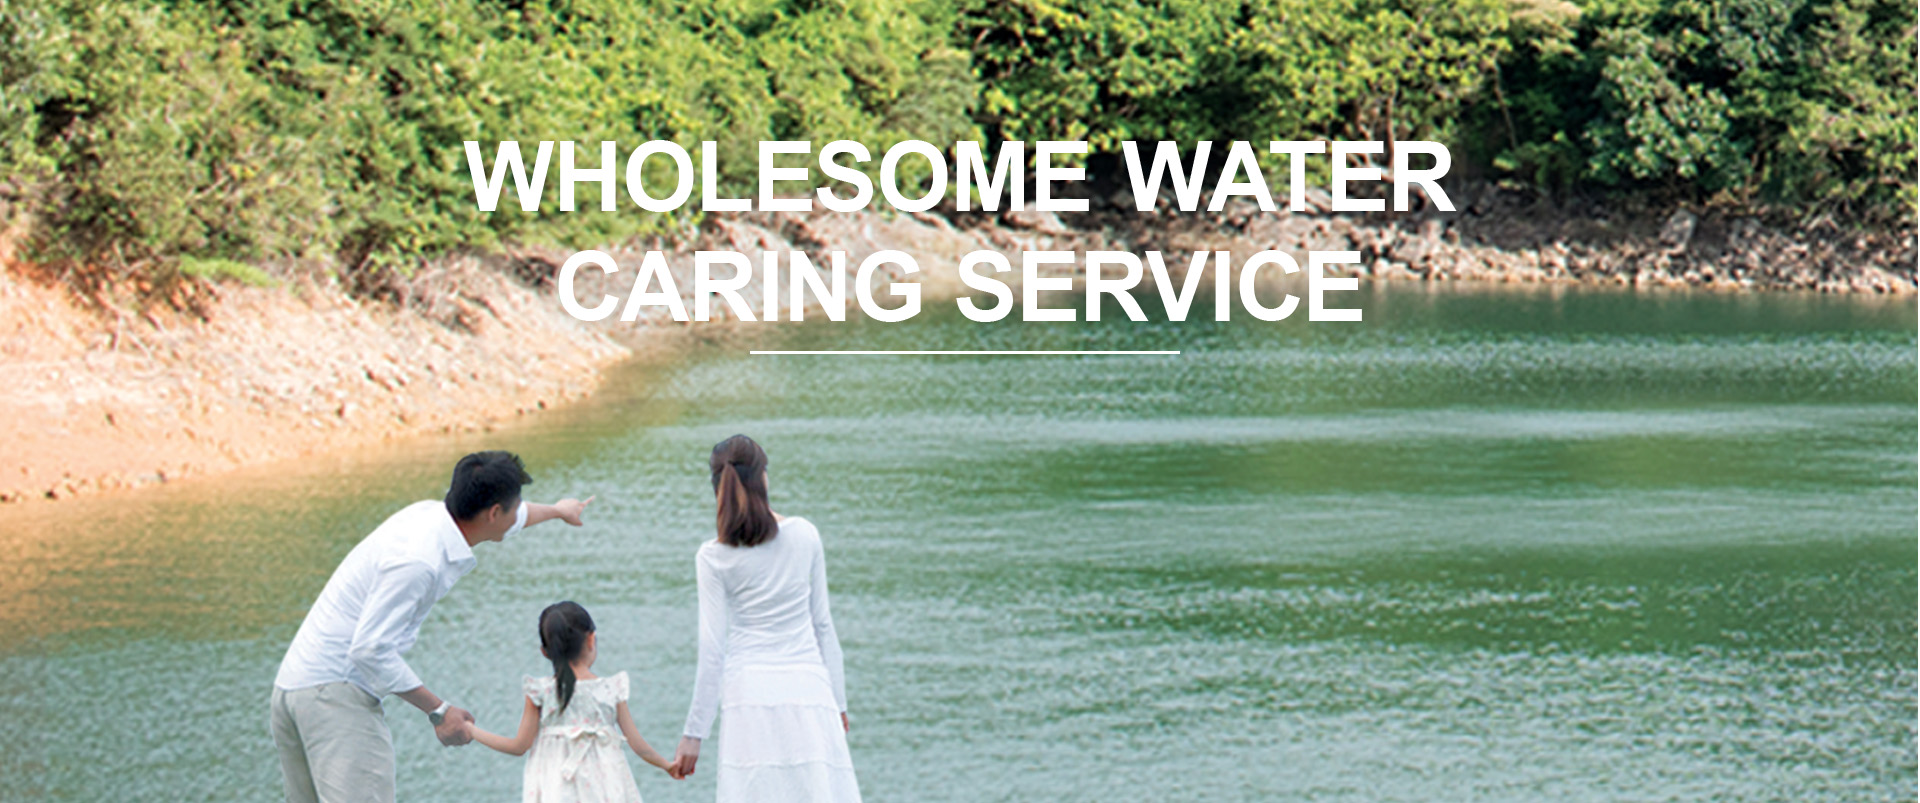 WHOLESOME WATER CARING SERVICE